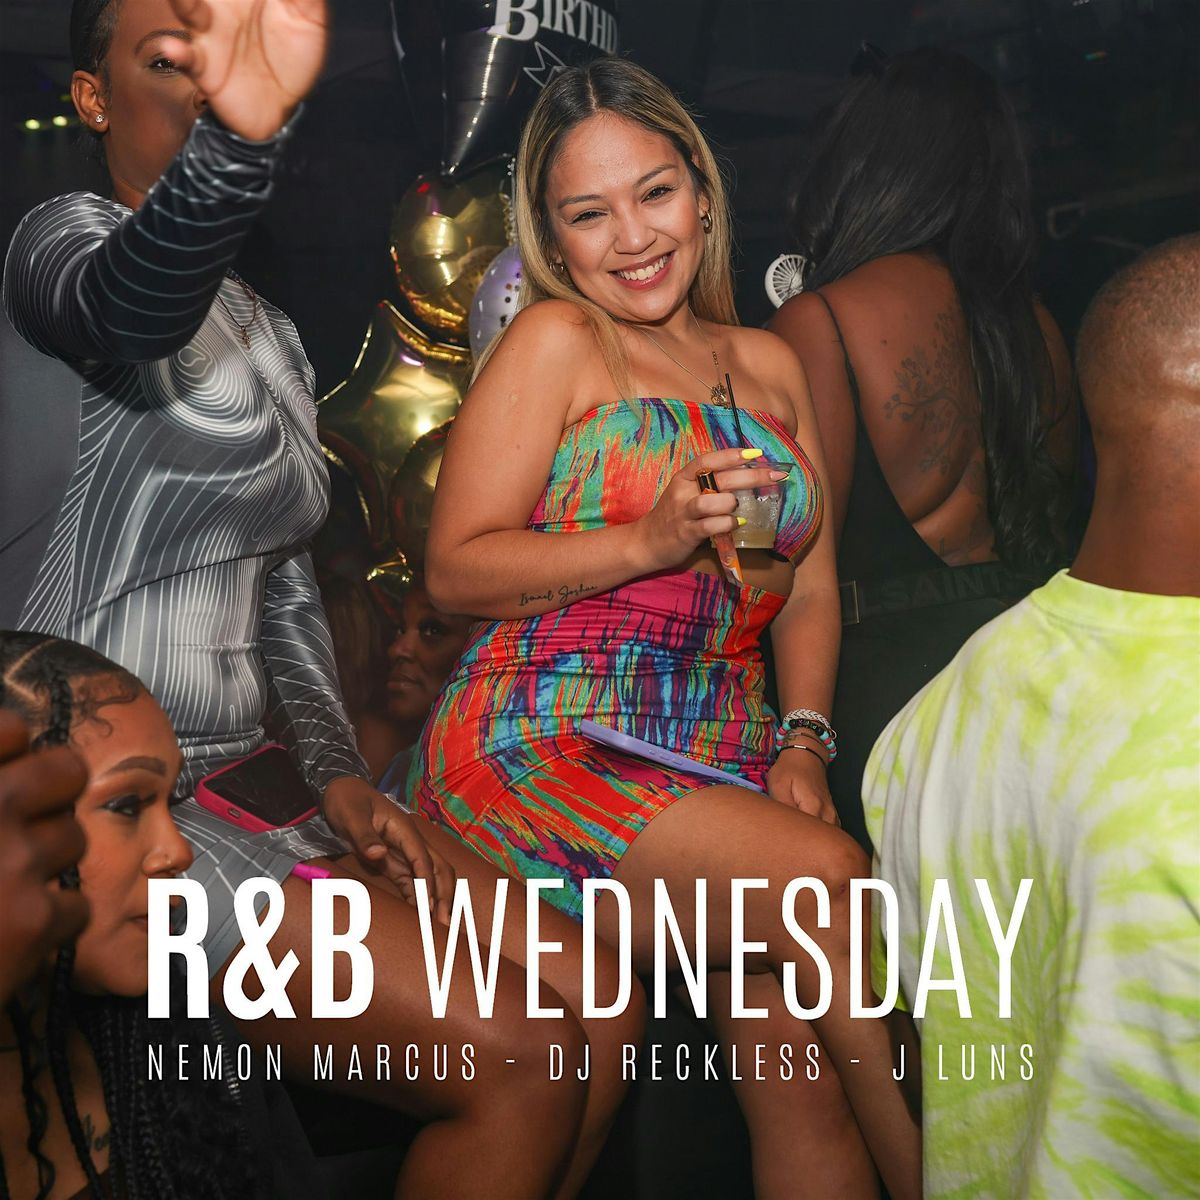 NC#1 Party R&b Wednesday for the 99 & 2000s edition